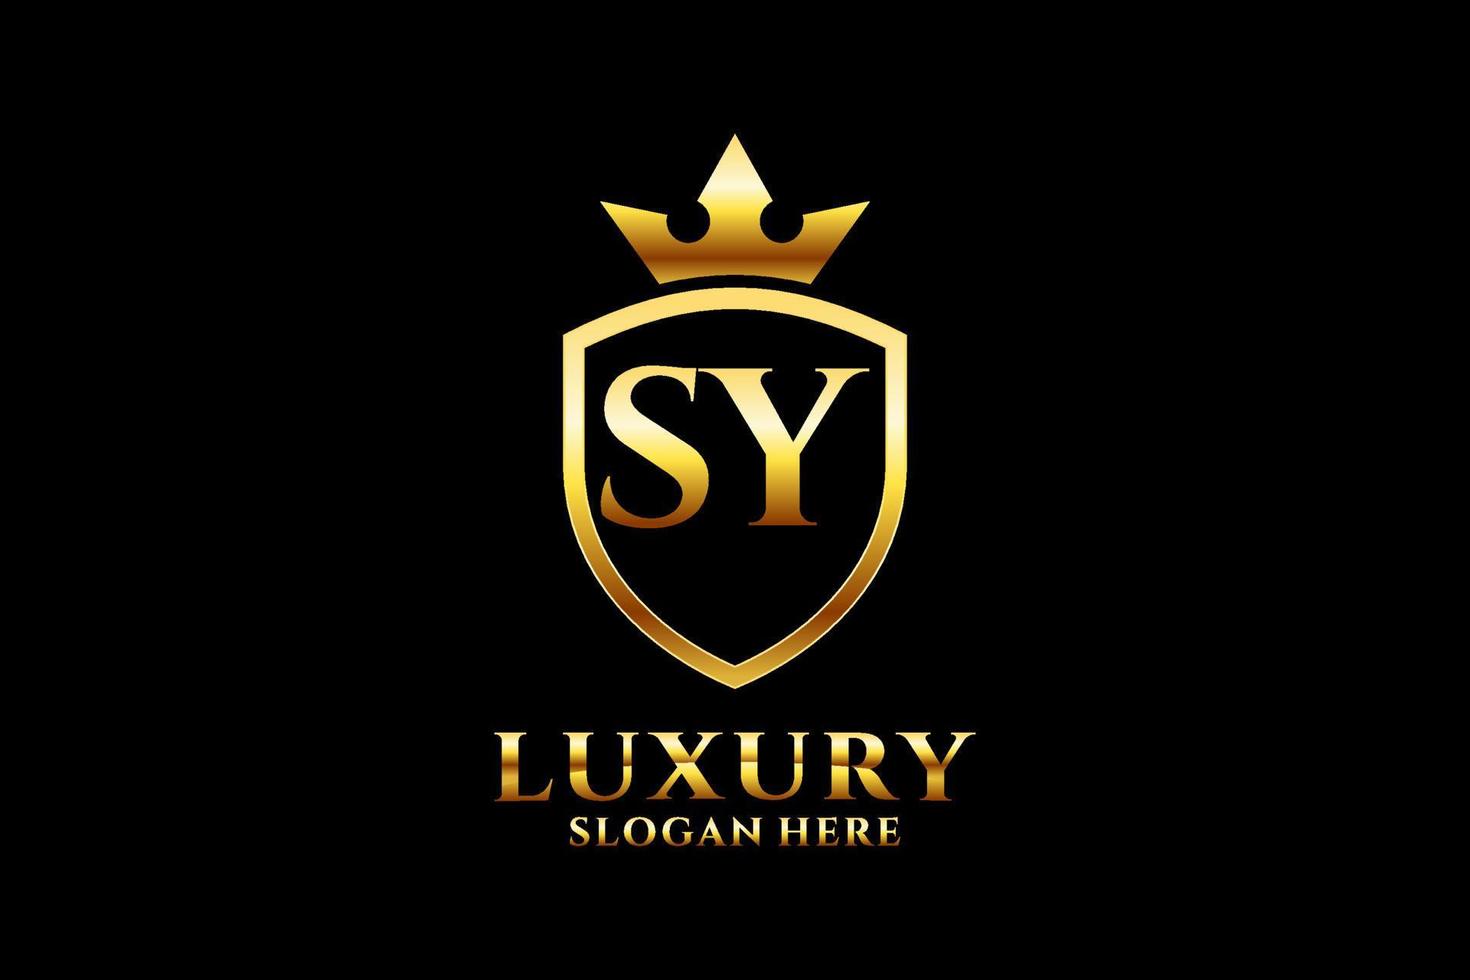 initial SY elegant luxury monogram logo or badge template with scrolls and royal crown - perfect for luxurious branding projects vector